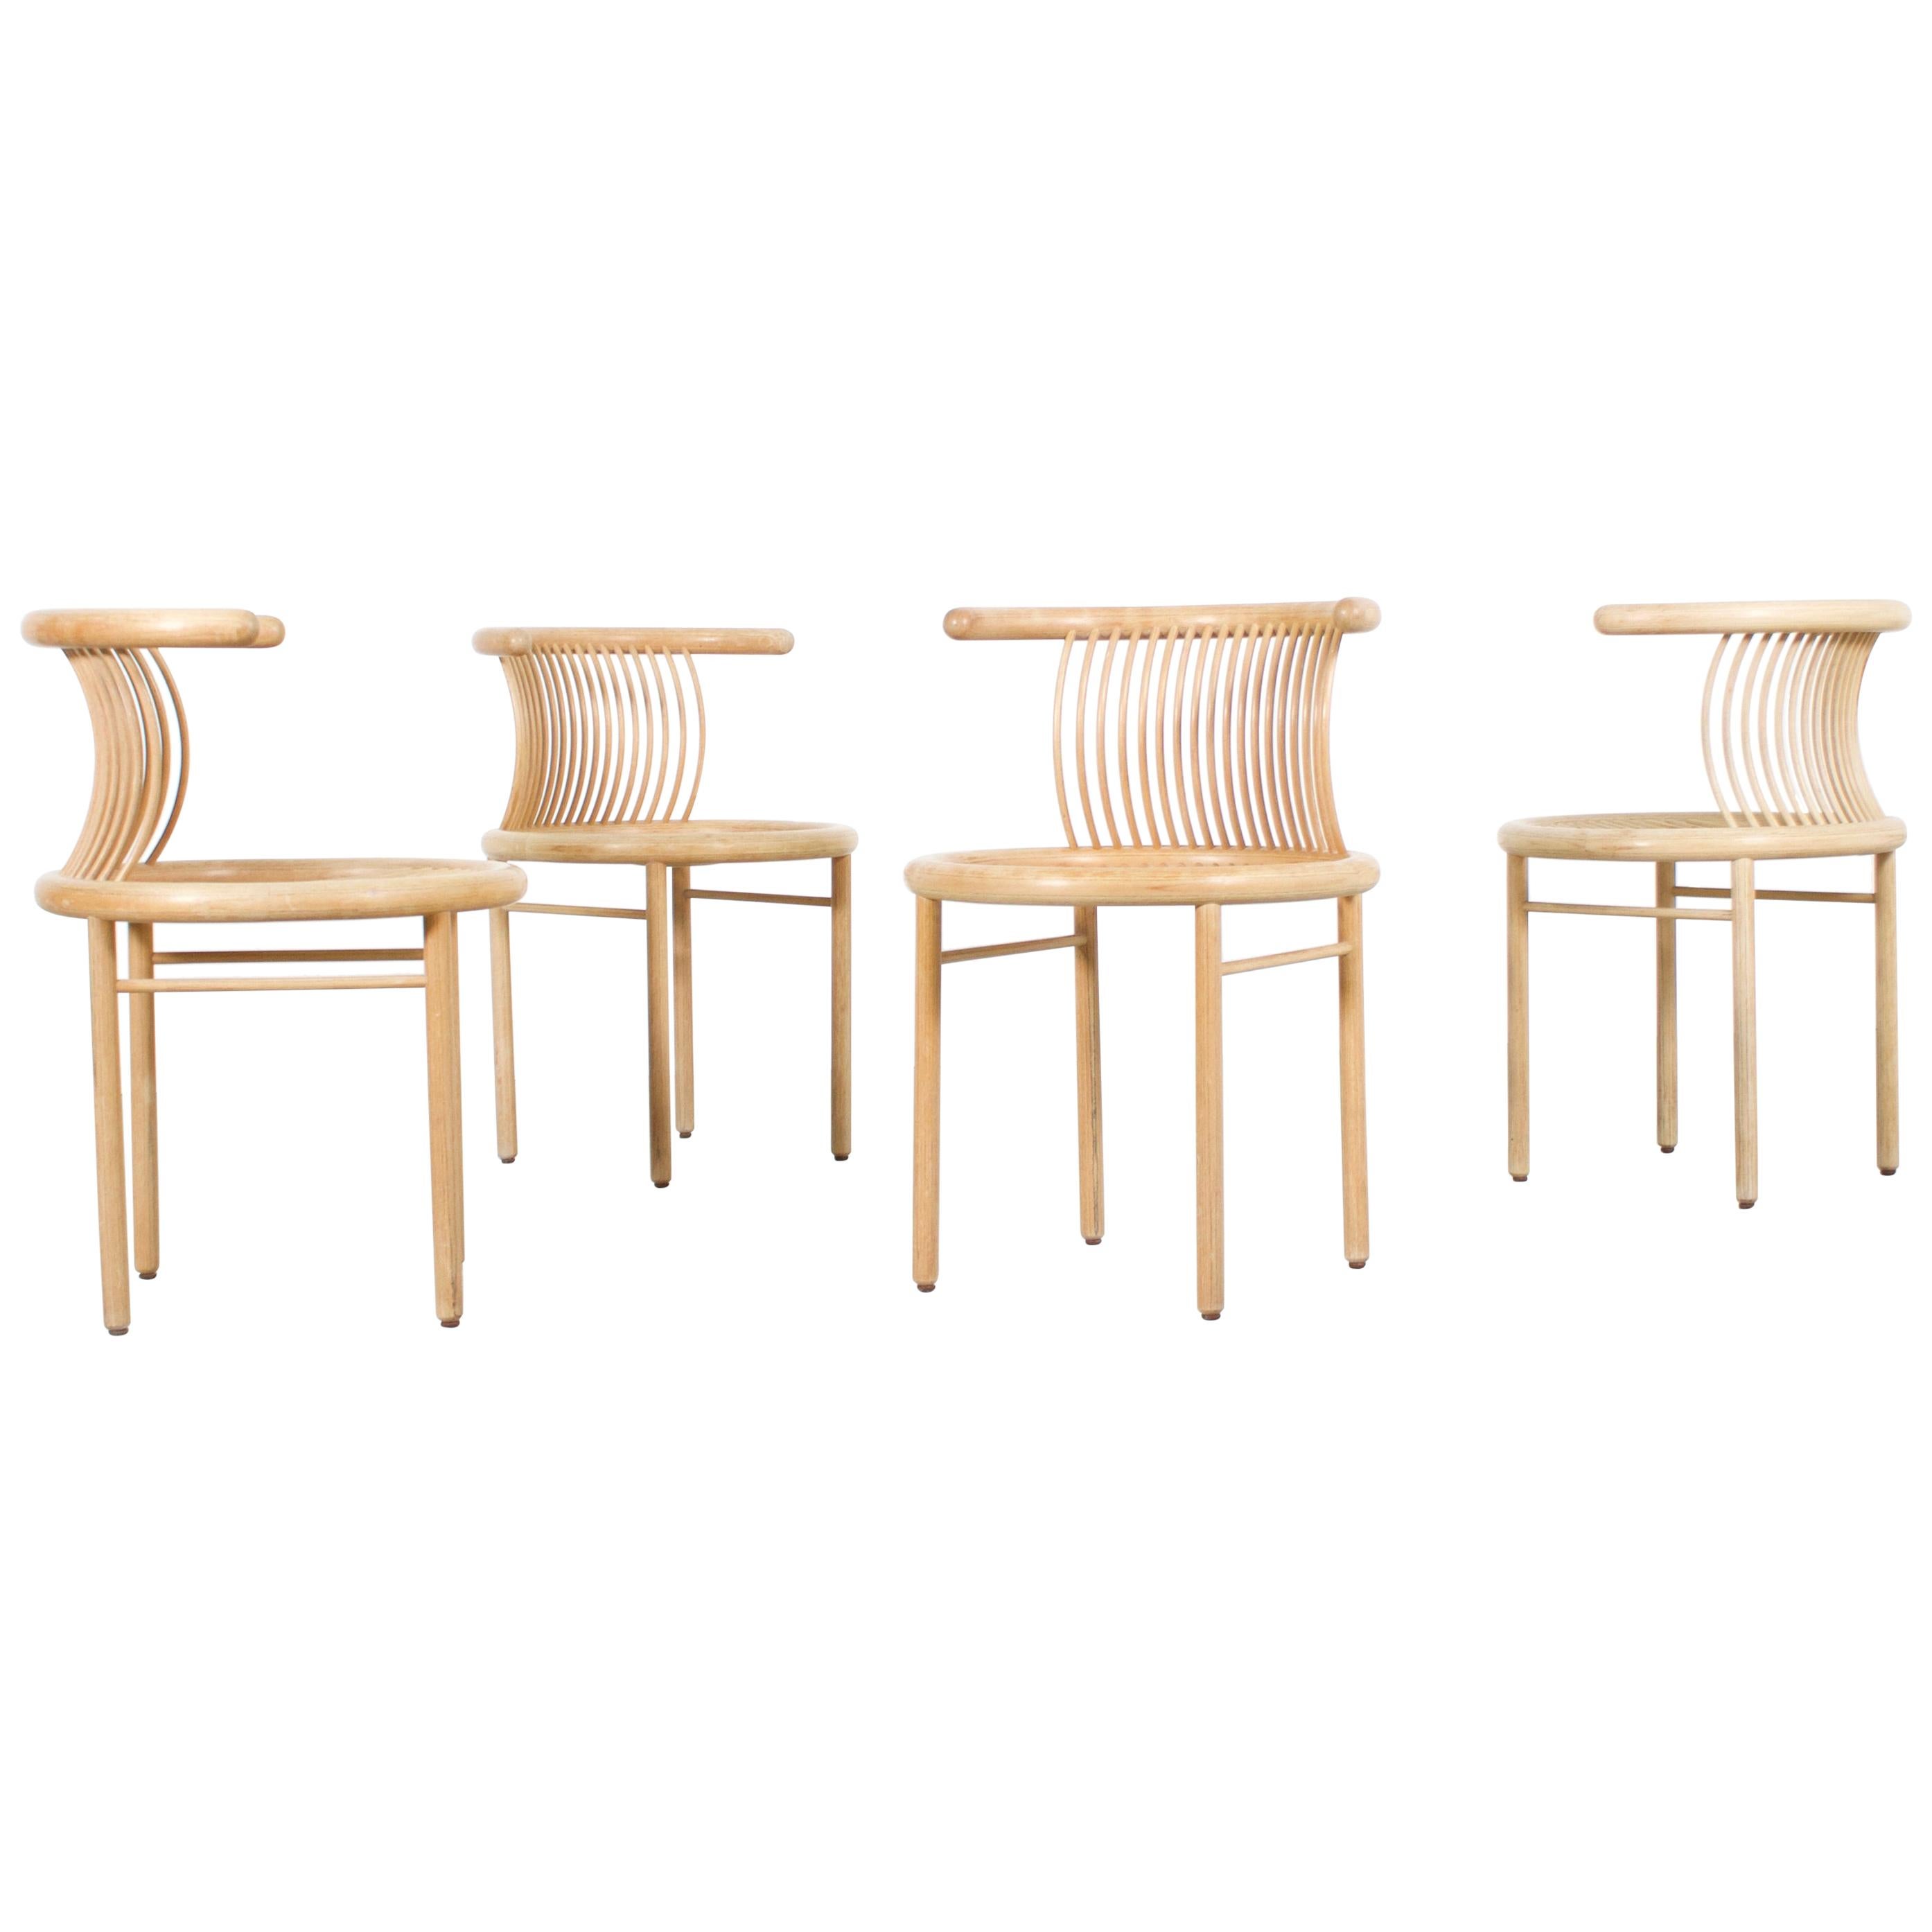 Set of Four Sculptural ‘Circo’ Dining Chairs by Herbert Ohl